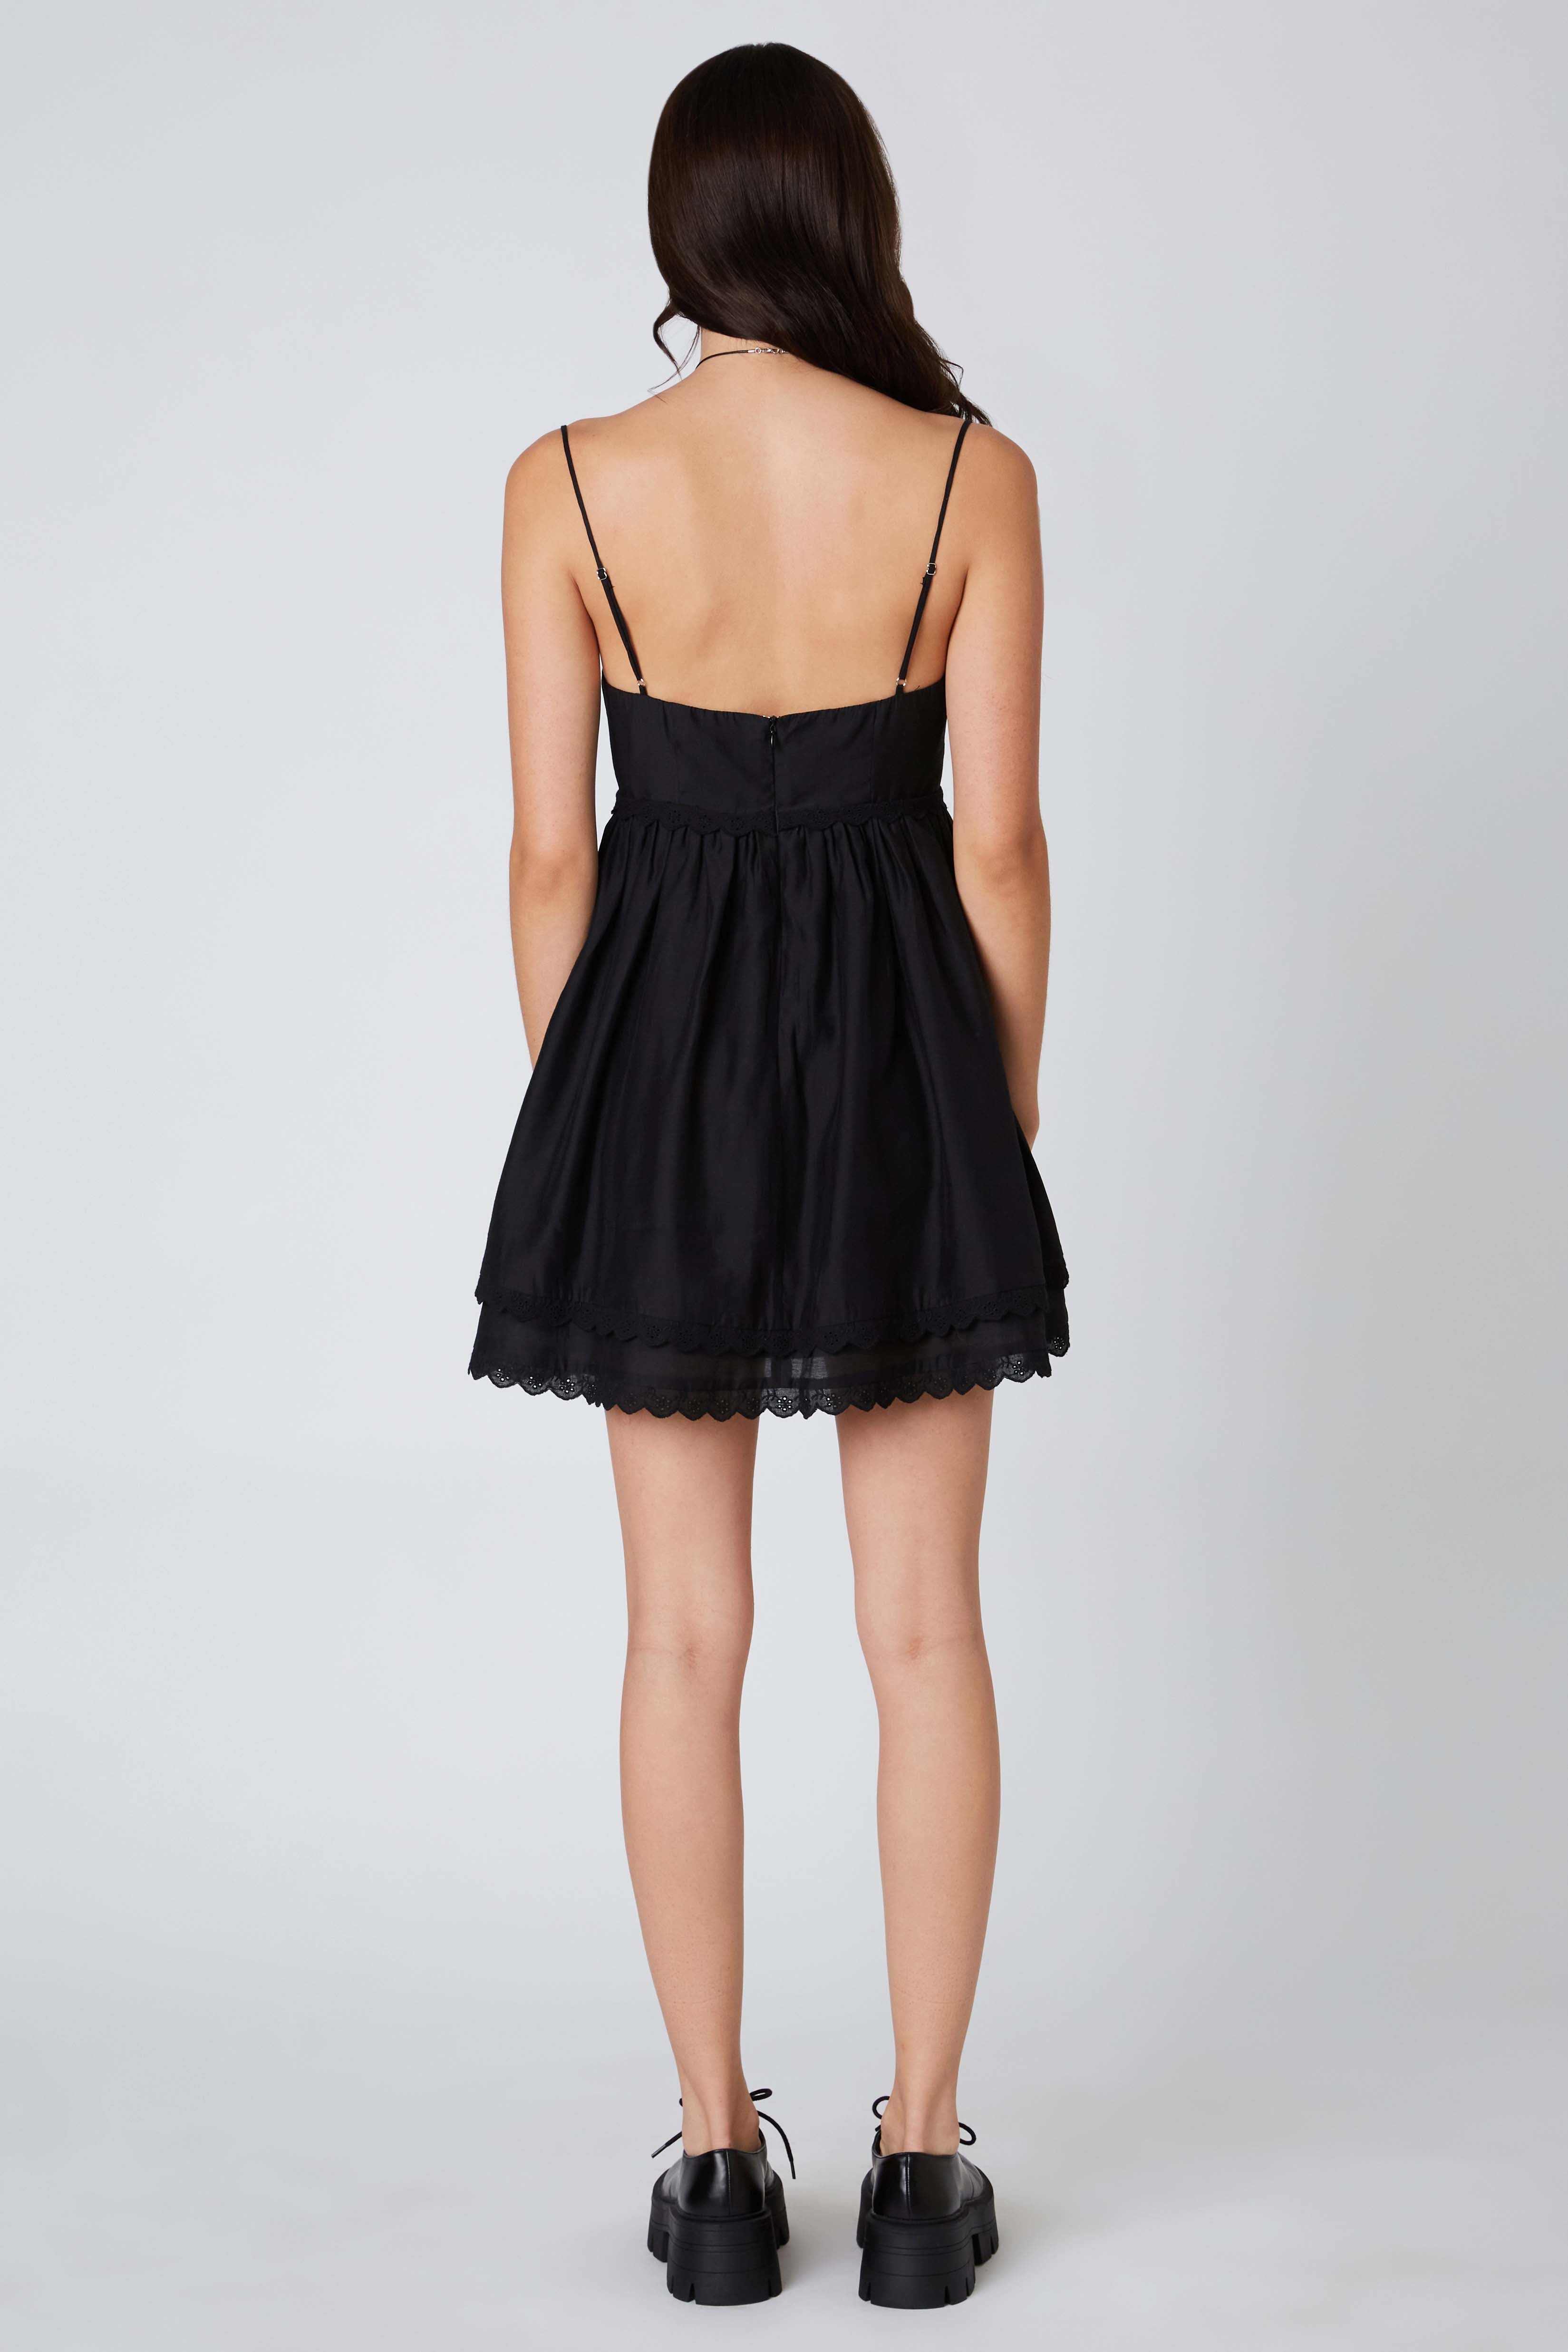 Corset Babydoll Dress in Black Back View